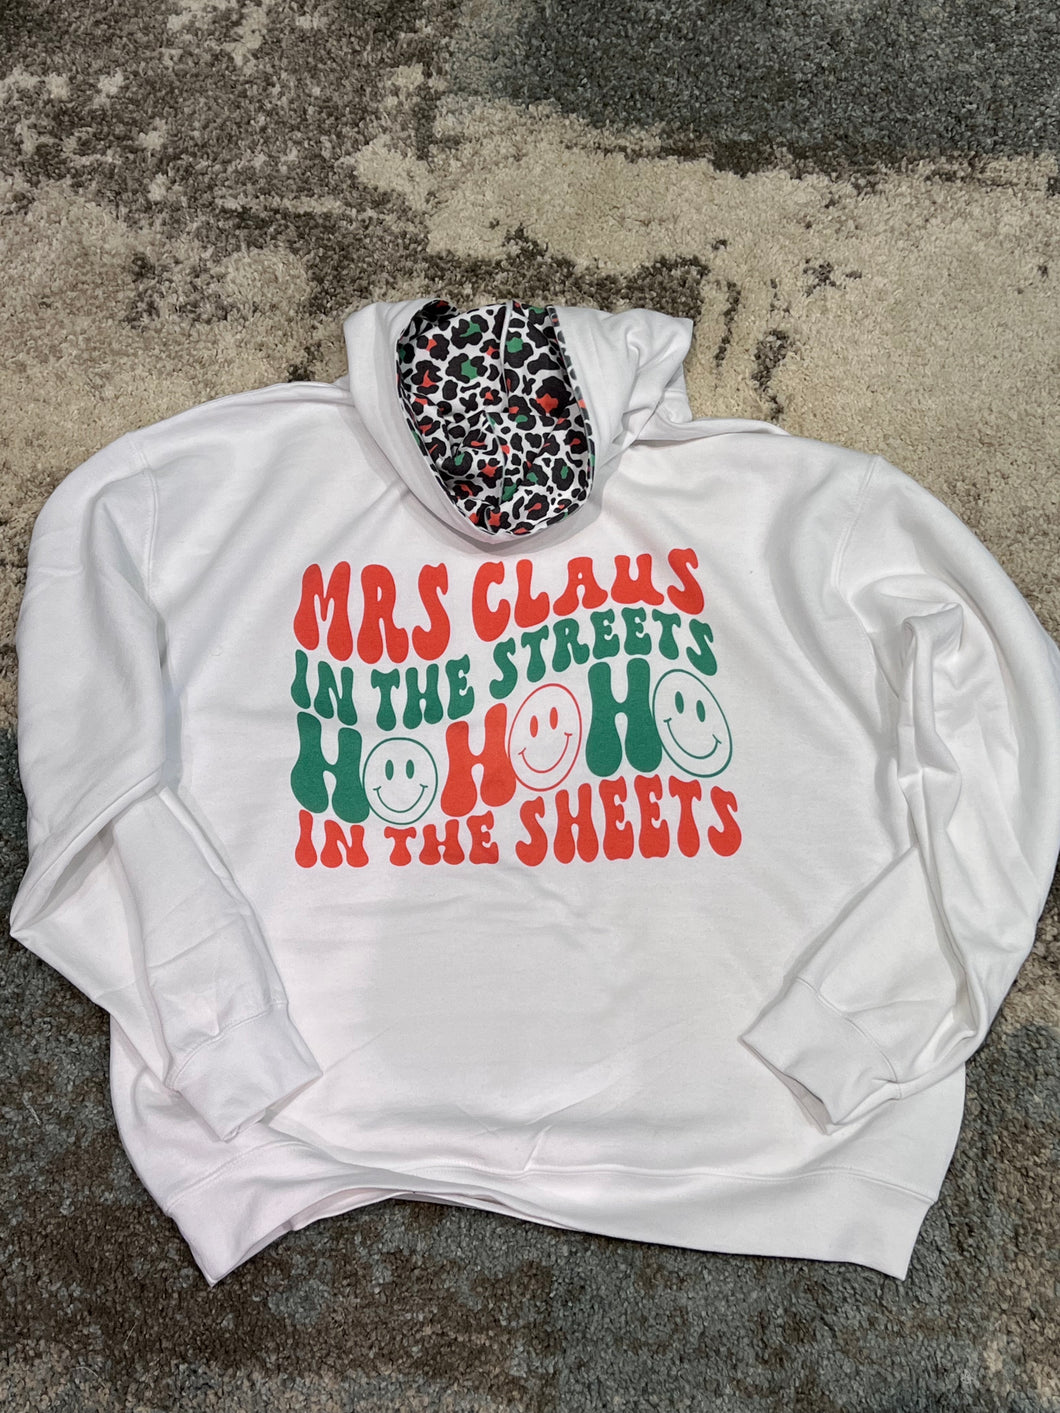 In The Streets Hoodie